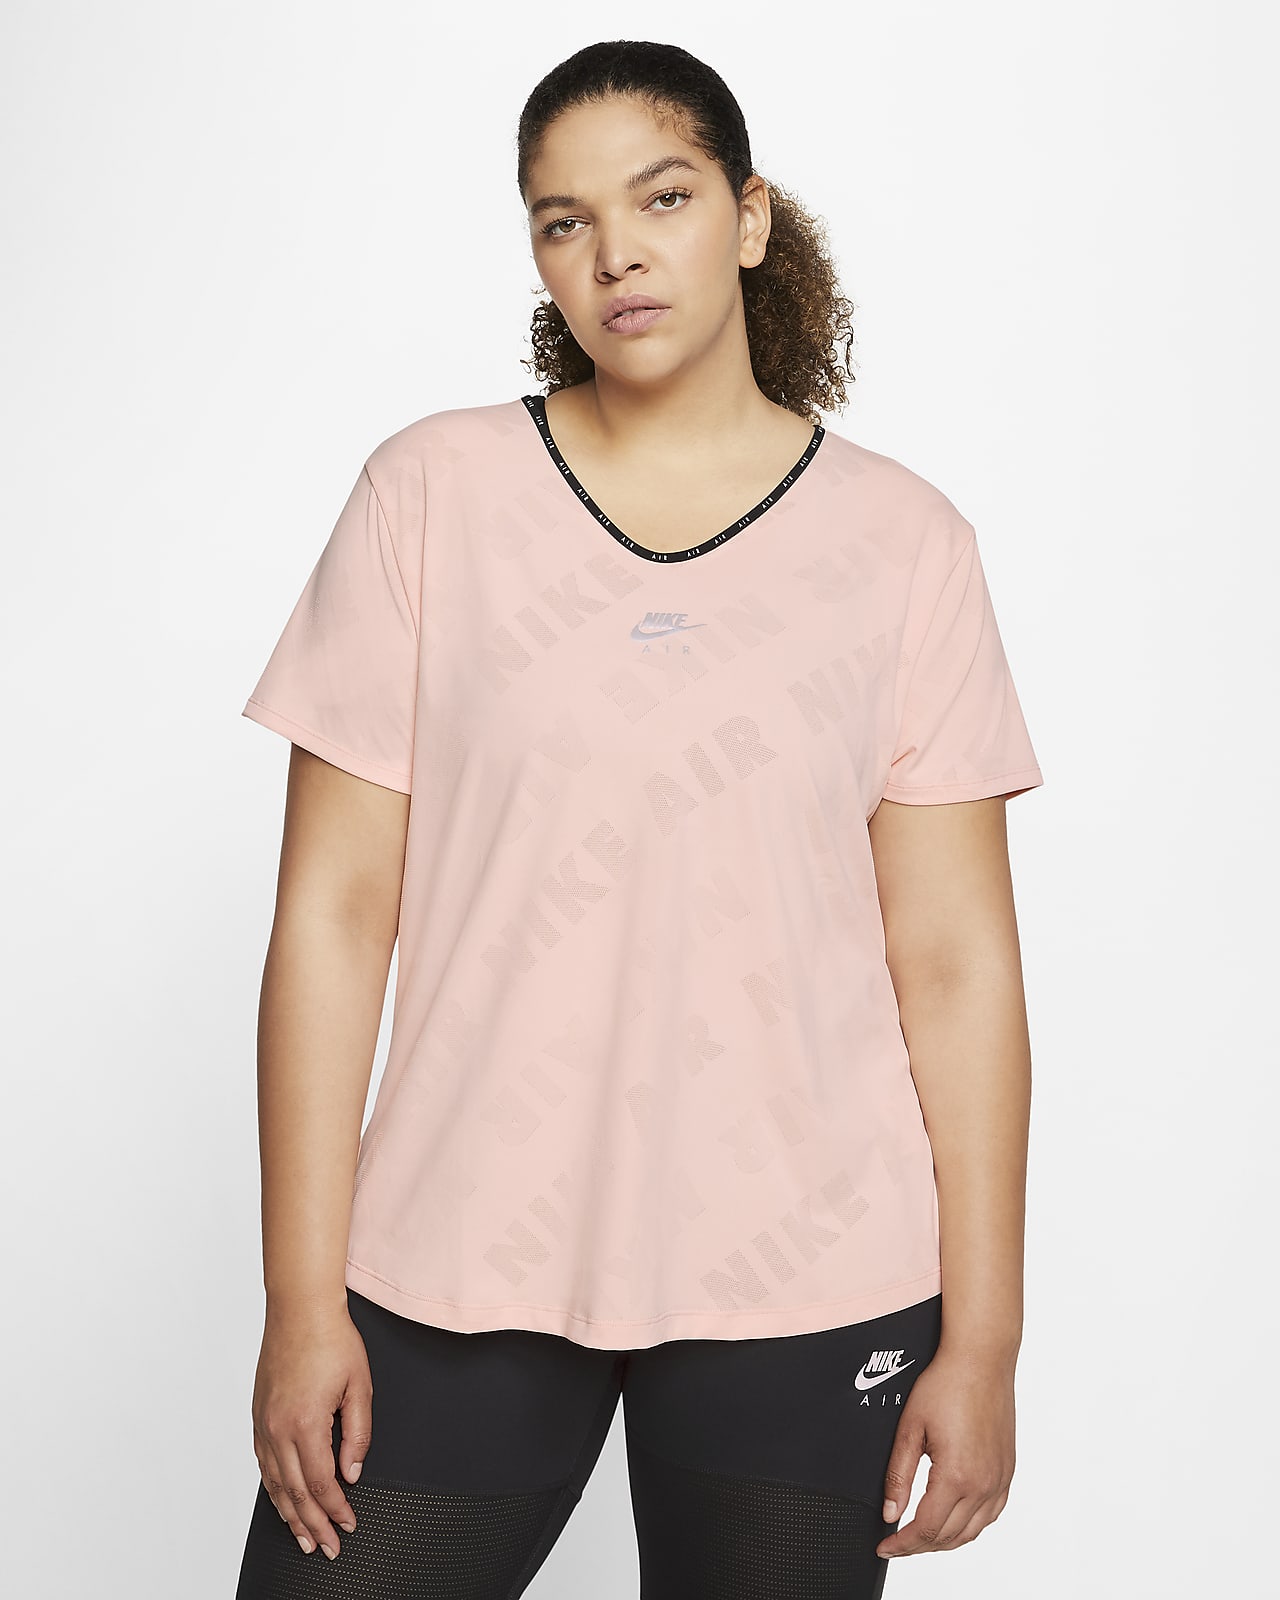 women's running tops with pockets